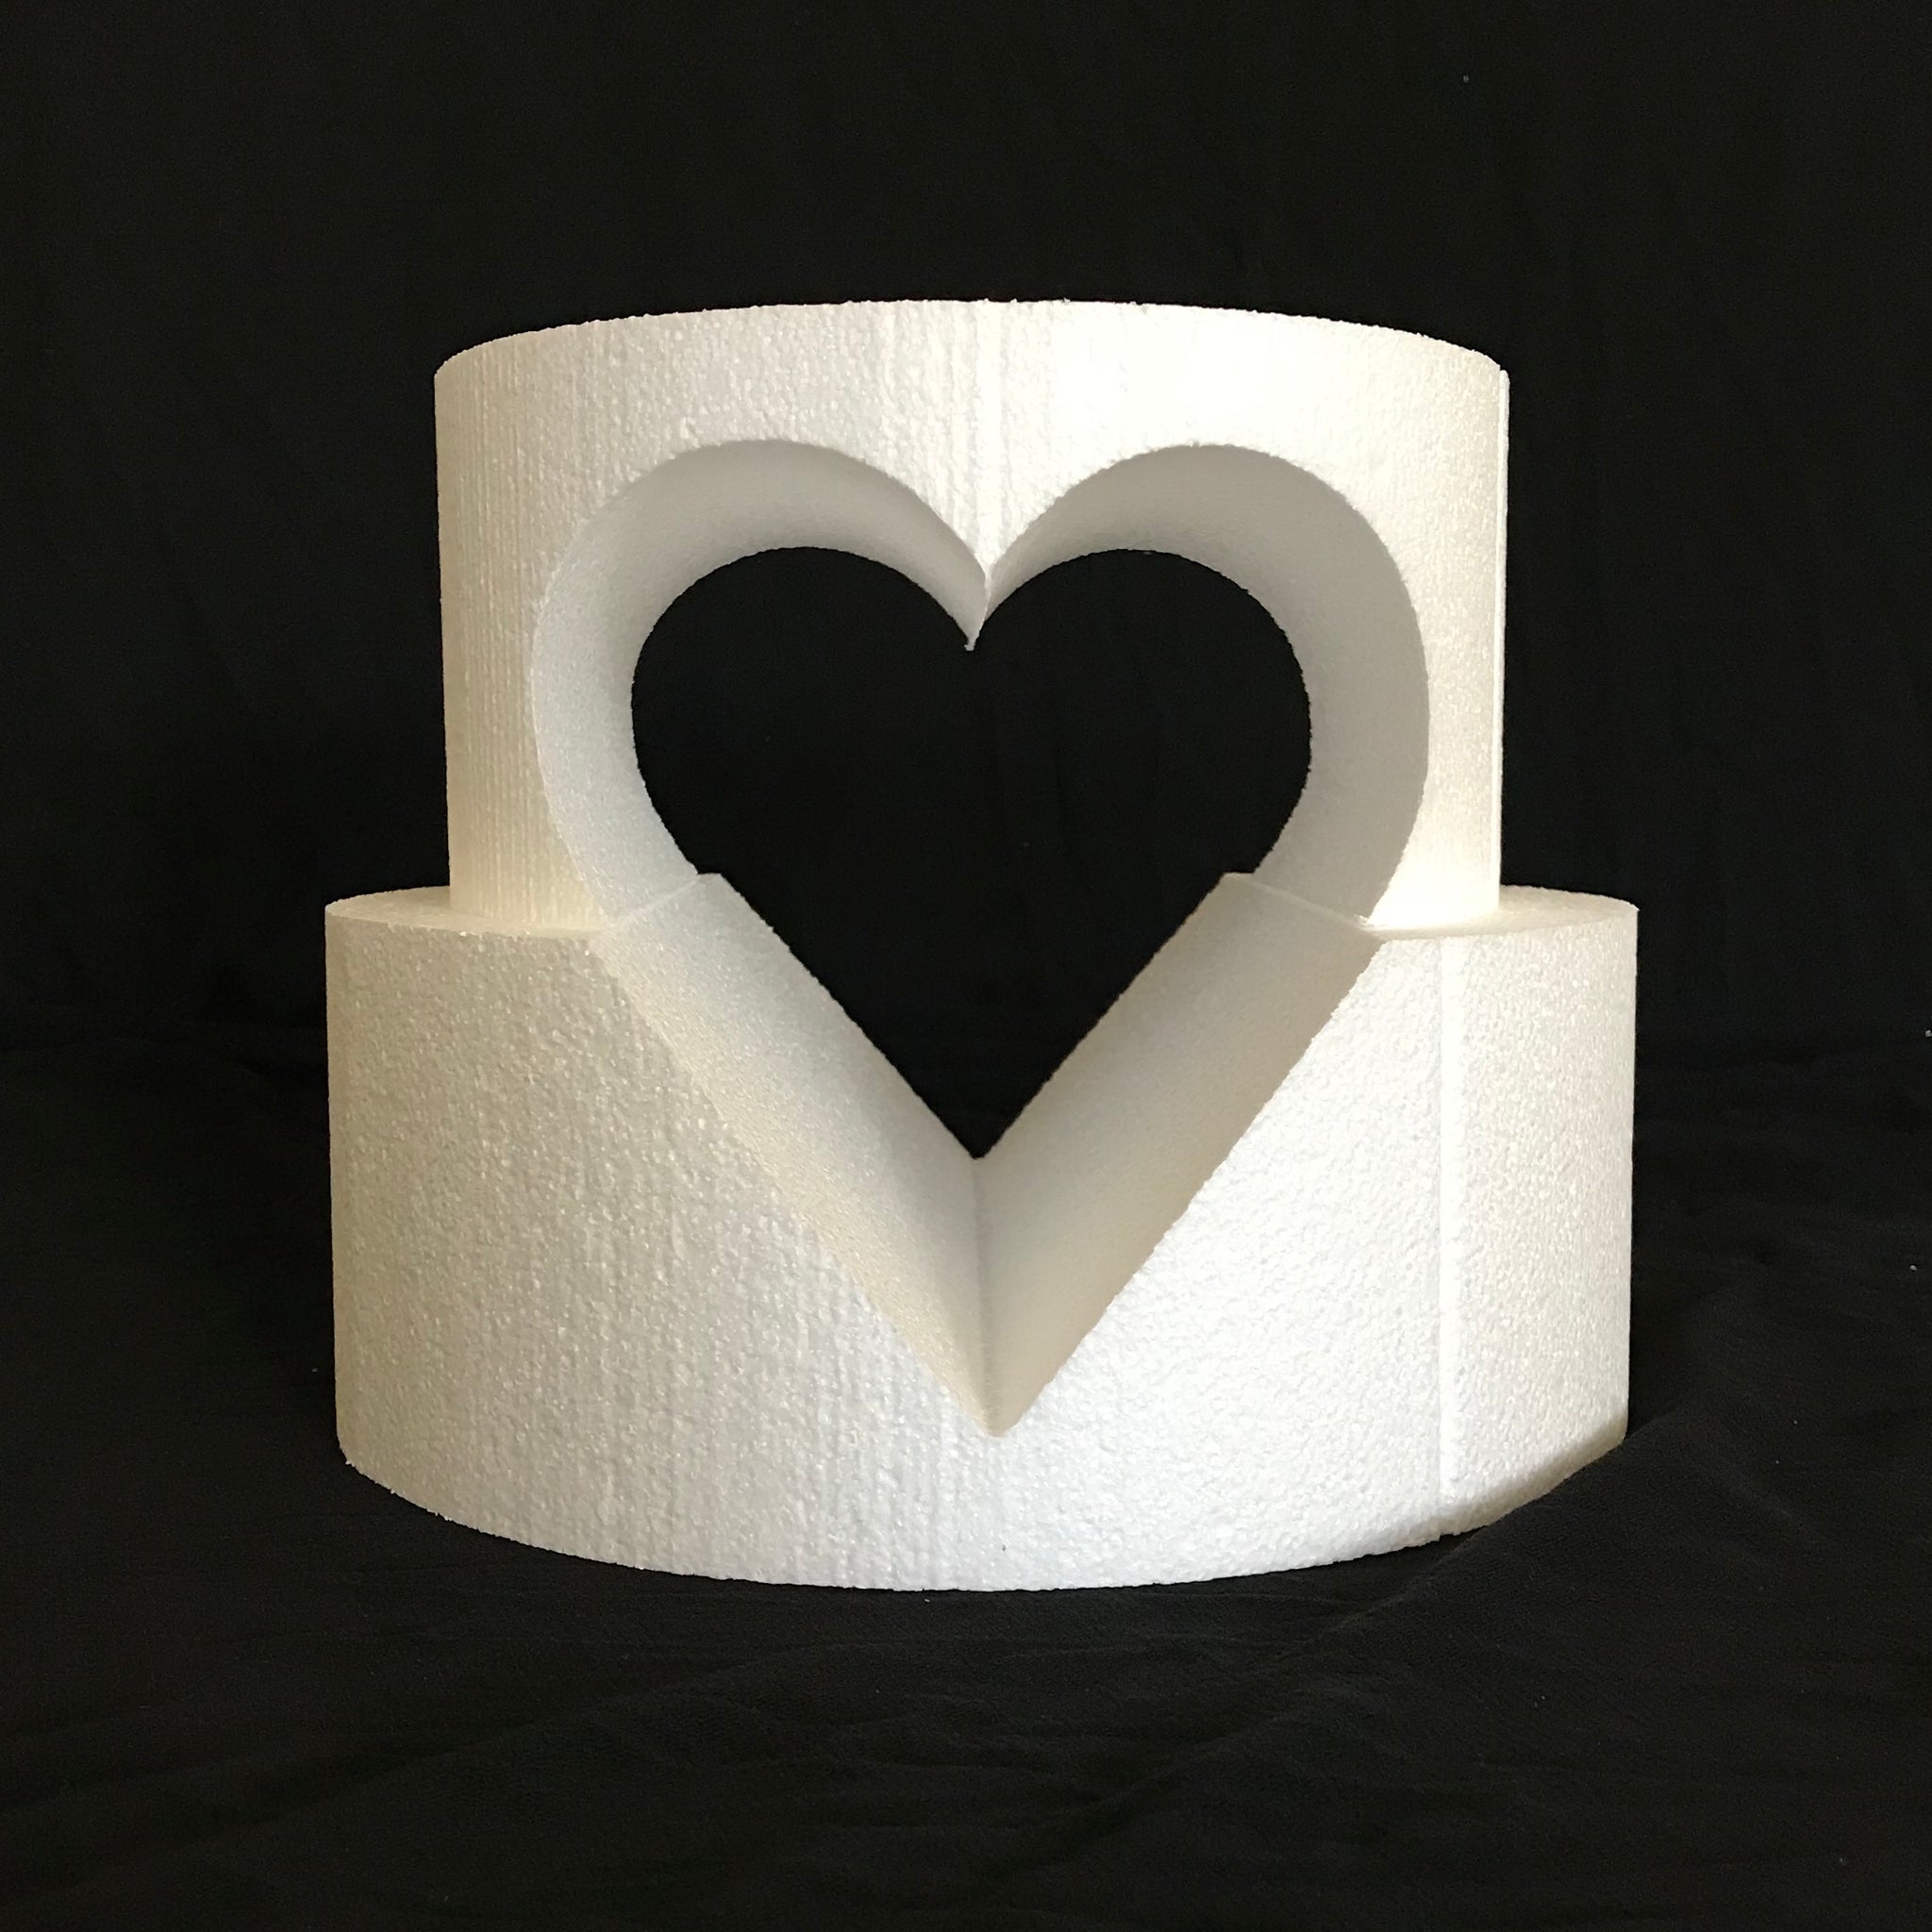 Specialty, Round Cake Dummy with Heart Shaped Cutout by Shape Innovation, Inc.